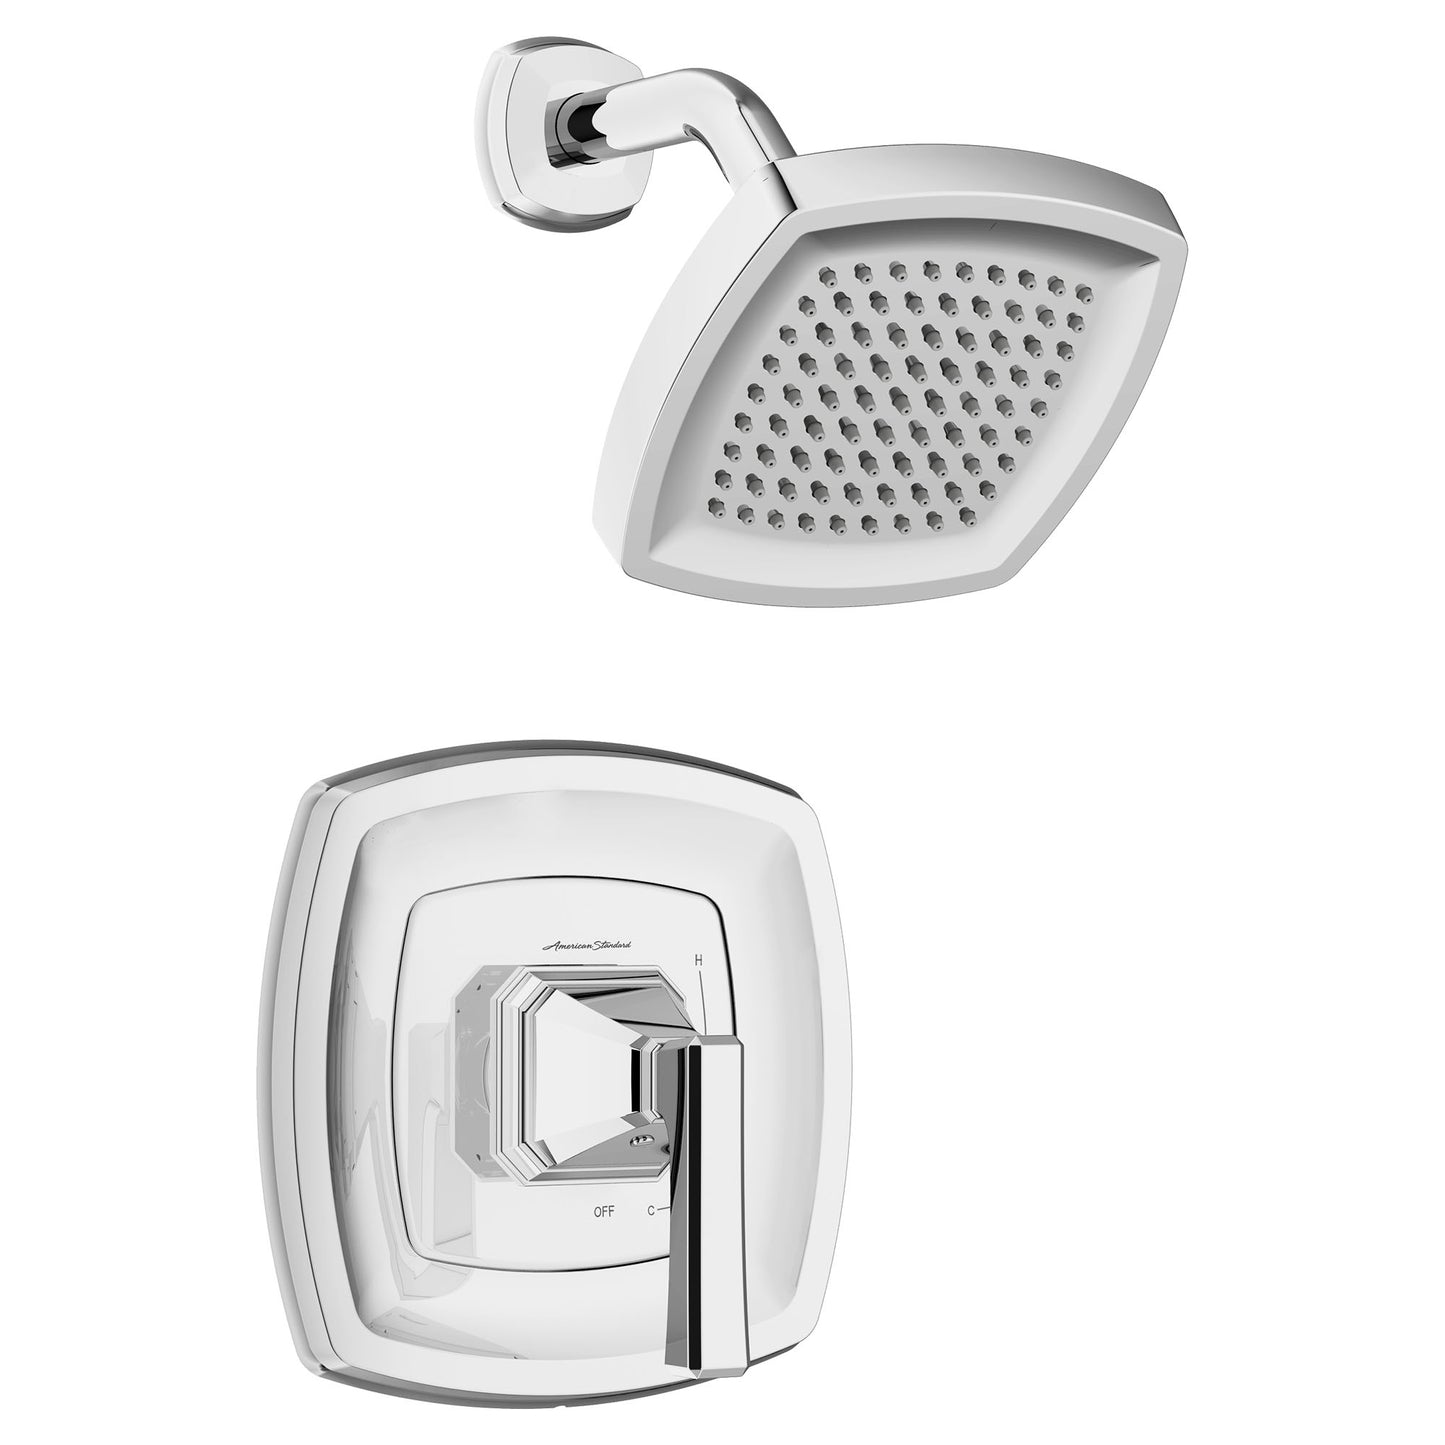 CRAWFORD 2.5 GPM SHOWER TRIM KIT WITH SHOWER HEAD